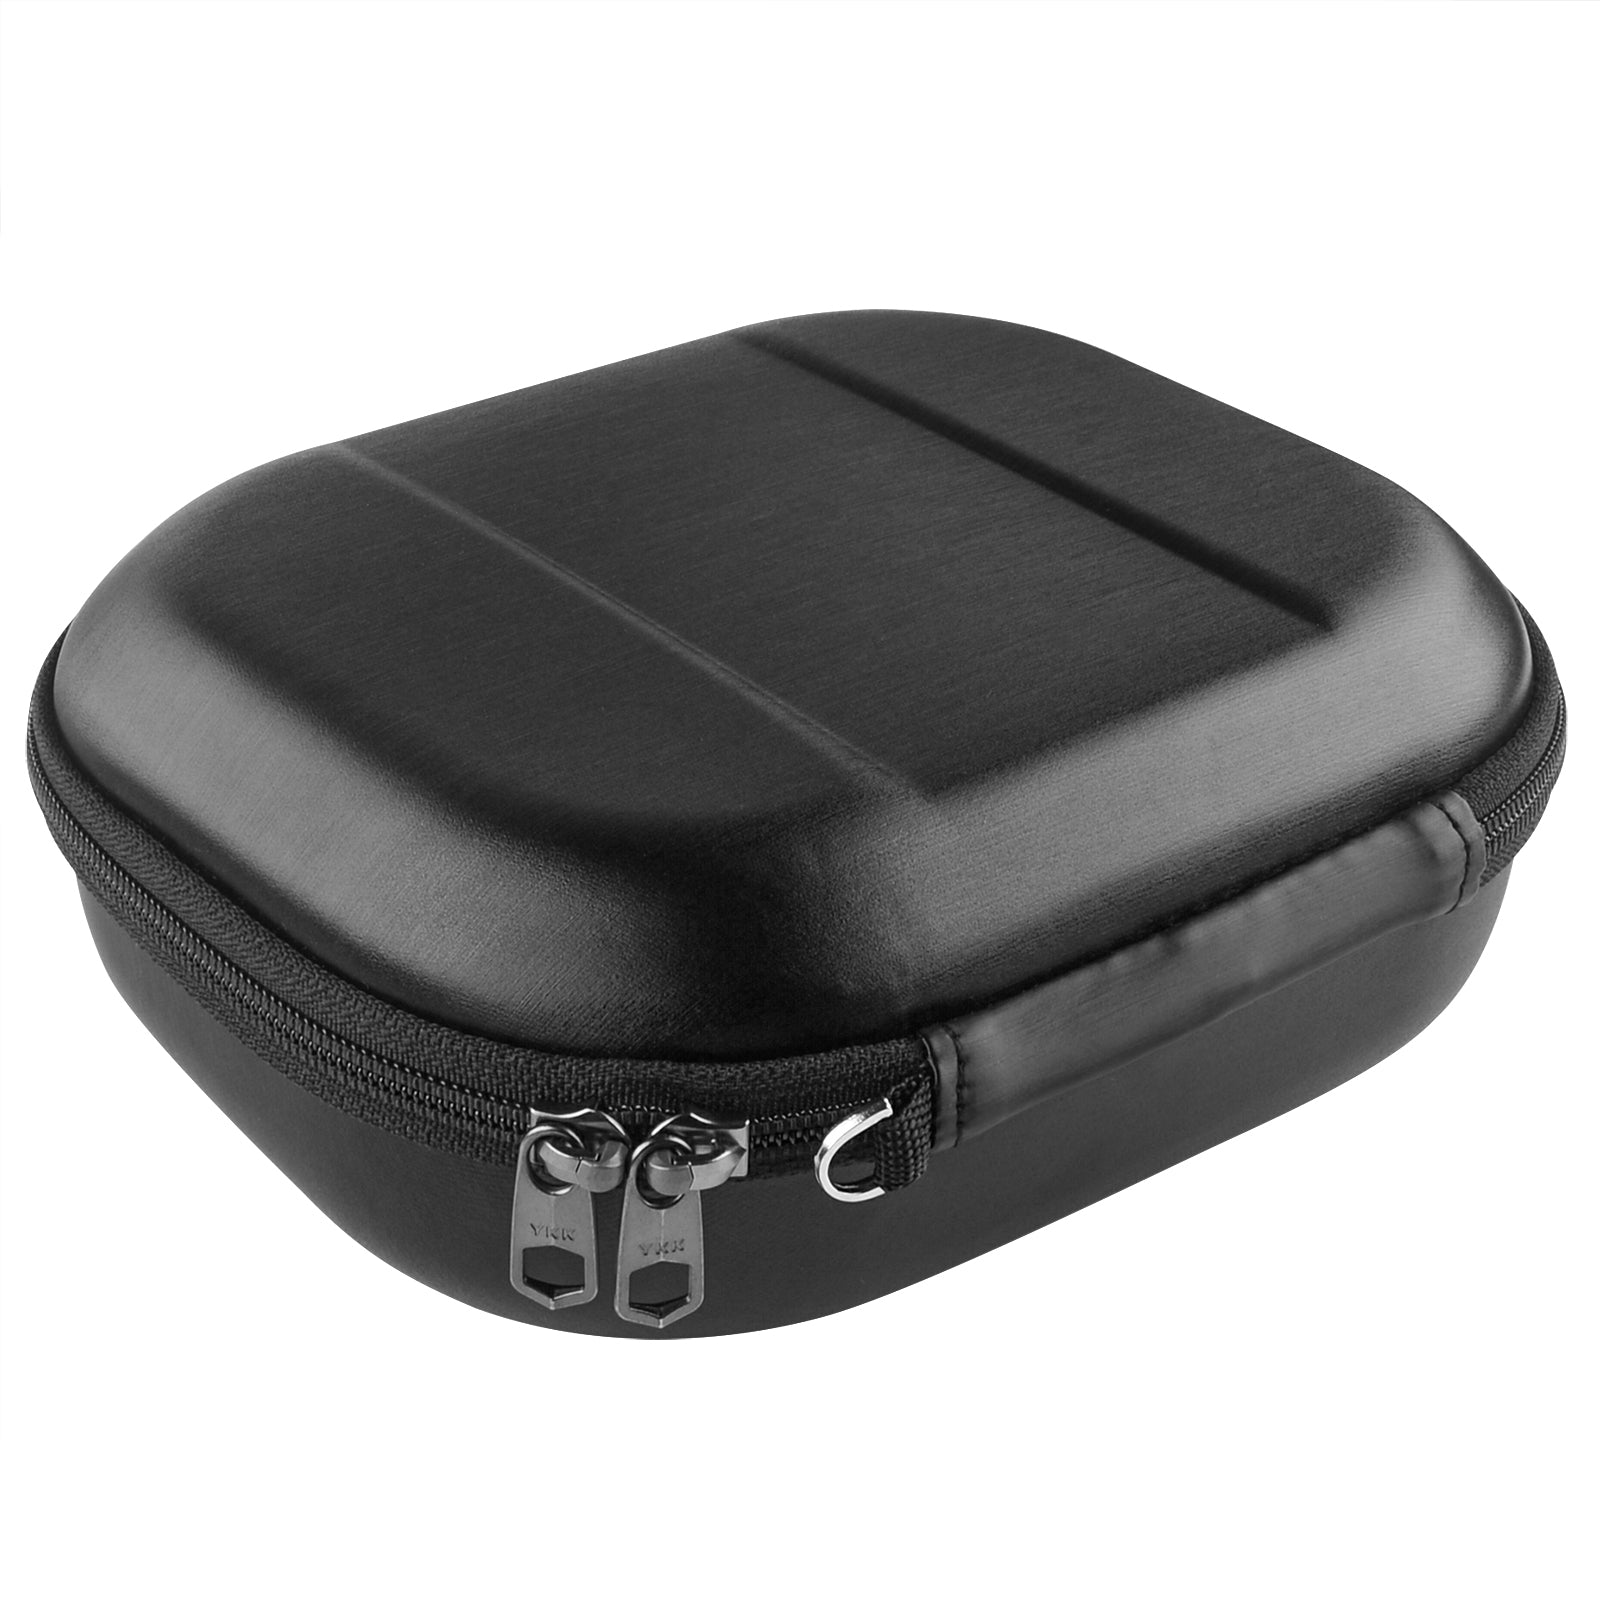 Newest Hard EVA Case for JBL Tune 720BT Headphones Box Carrying Case Bag  Portable Storage Cover